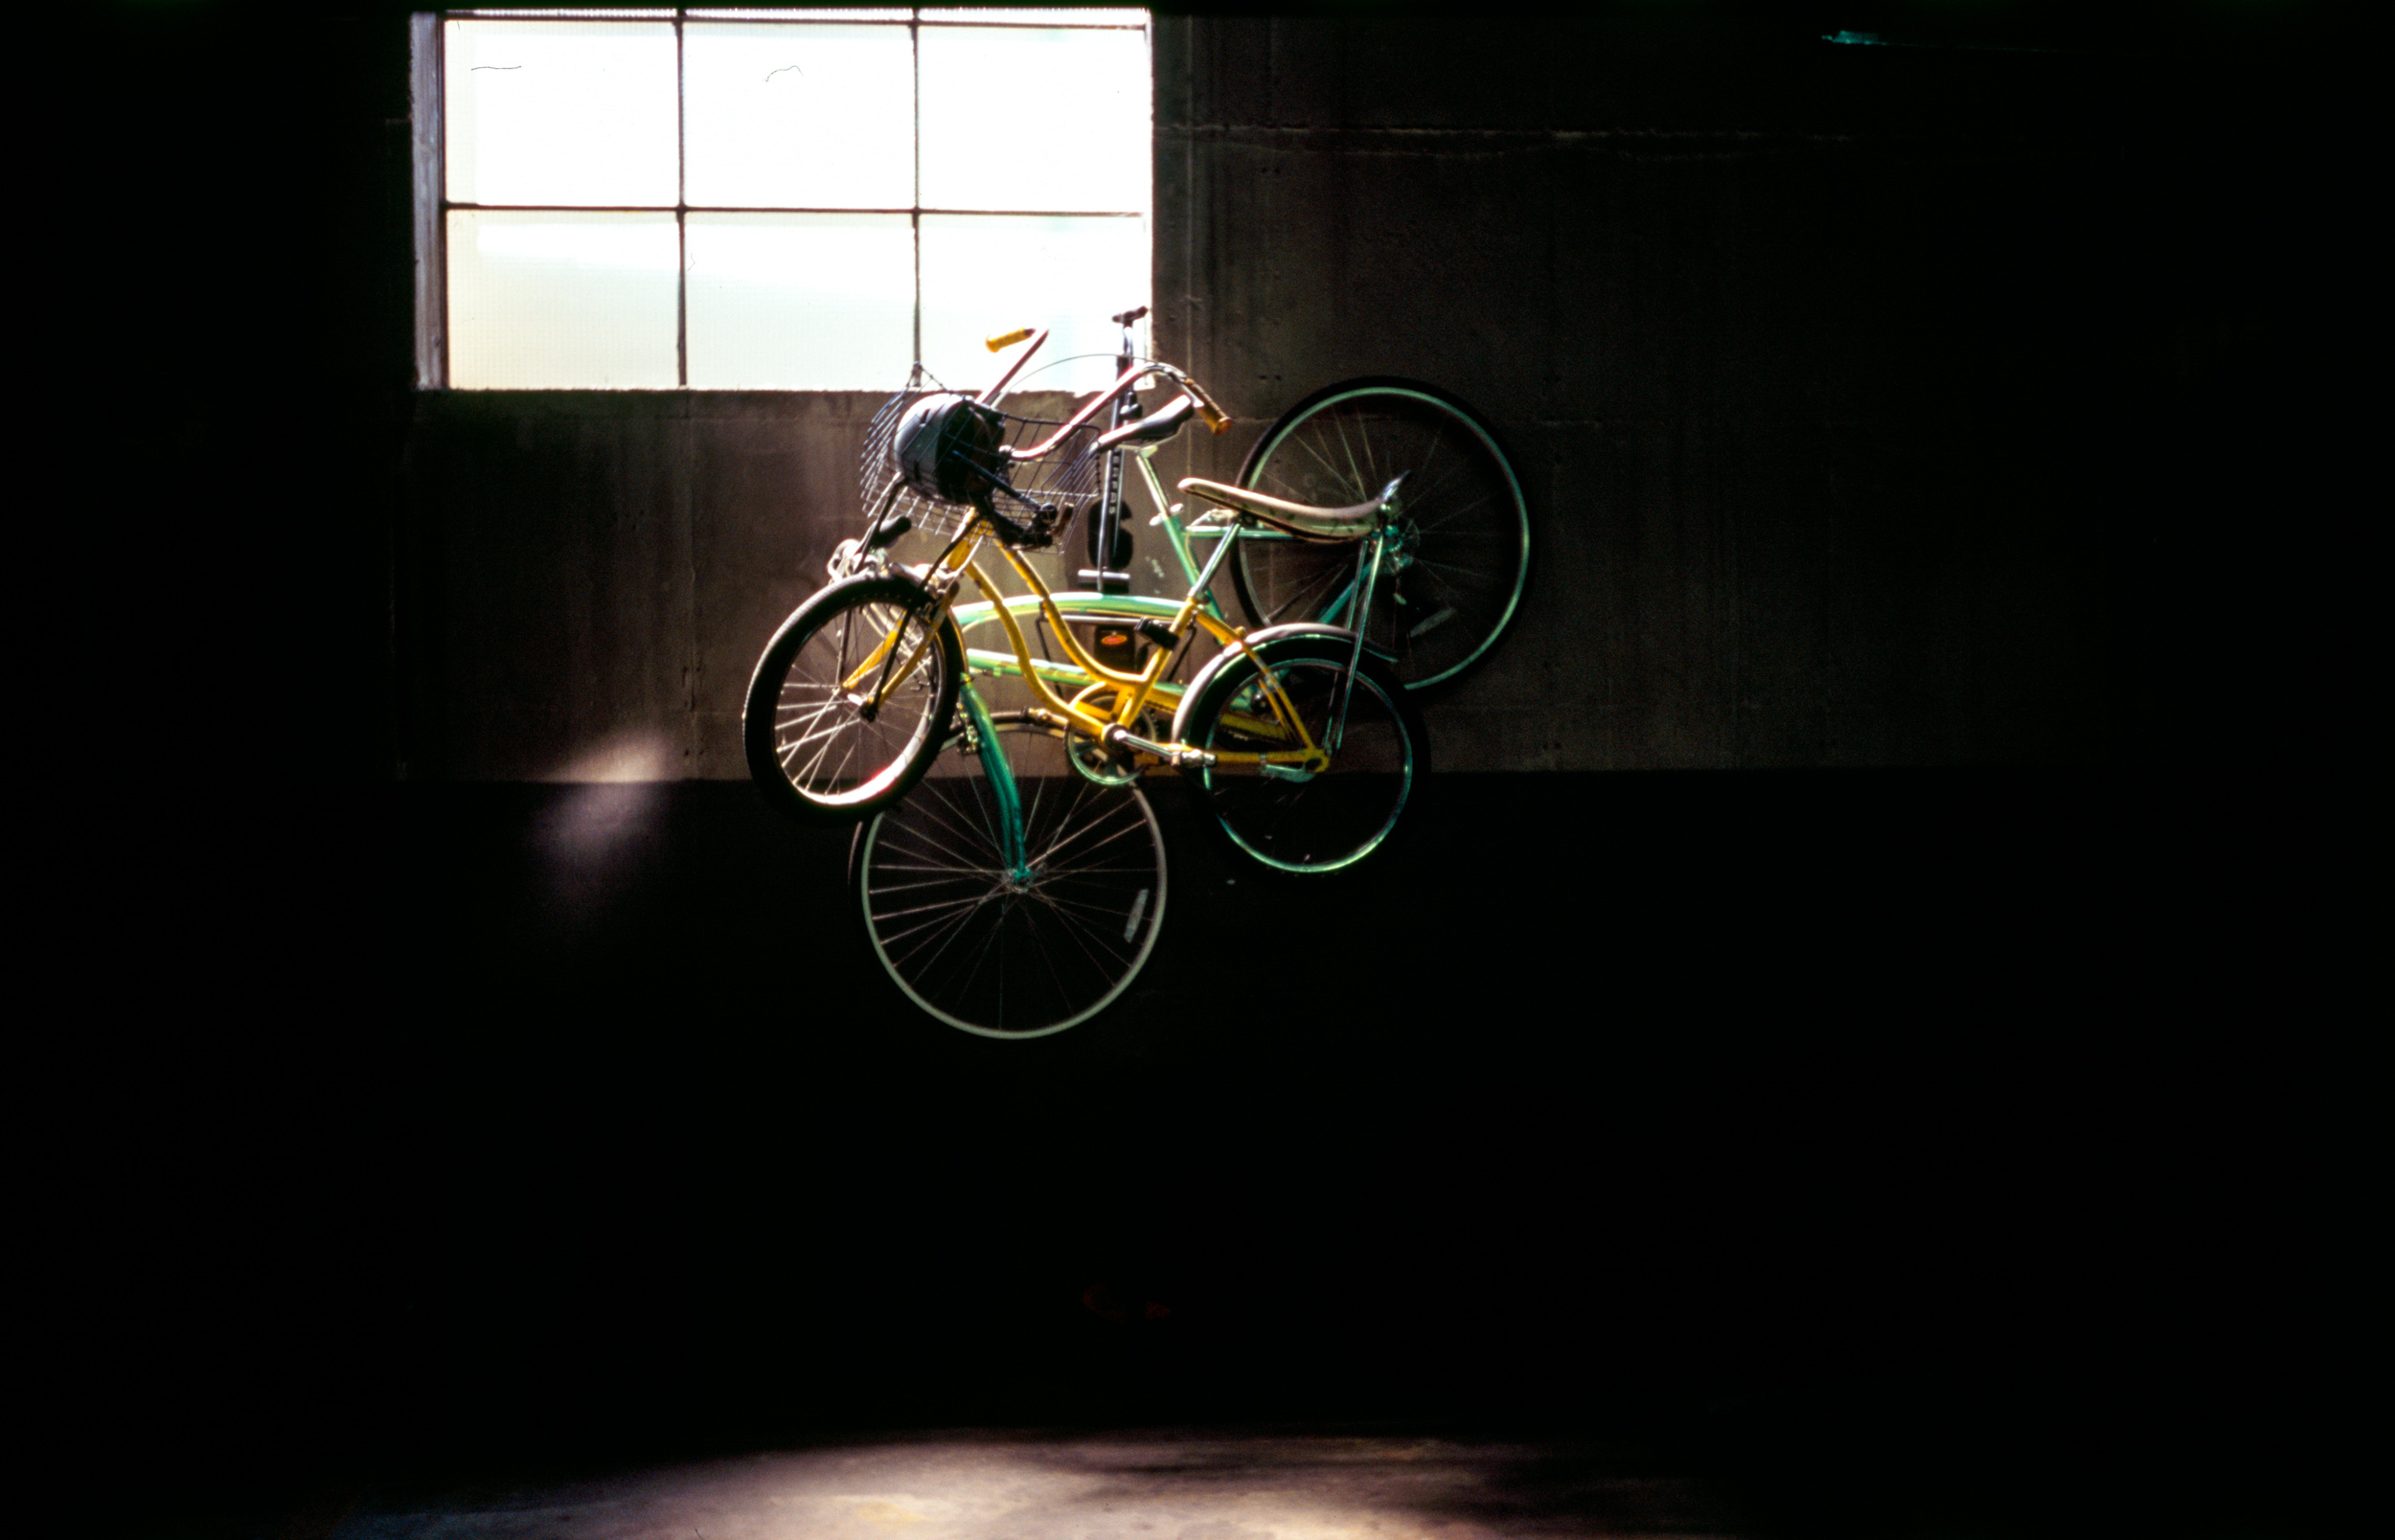 BIKES-HANG-IN-A-PARKING-LOT-GARAGE-ILLUMINATED-BY-THE-WINDOW